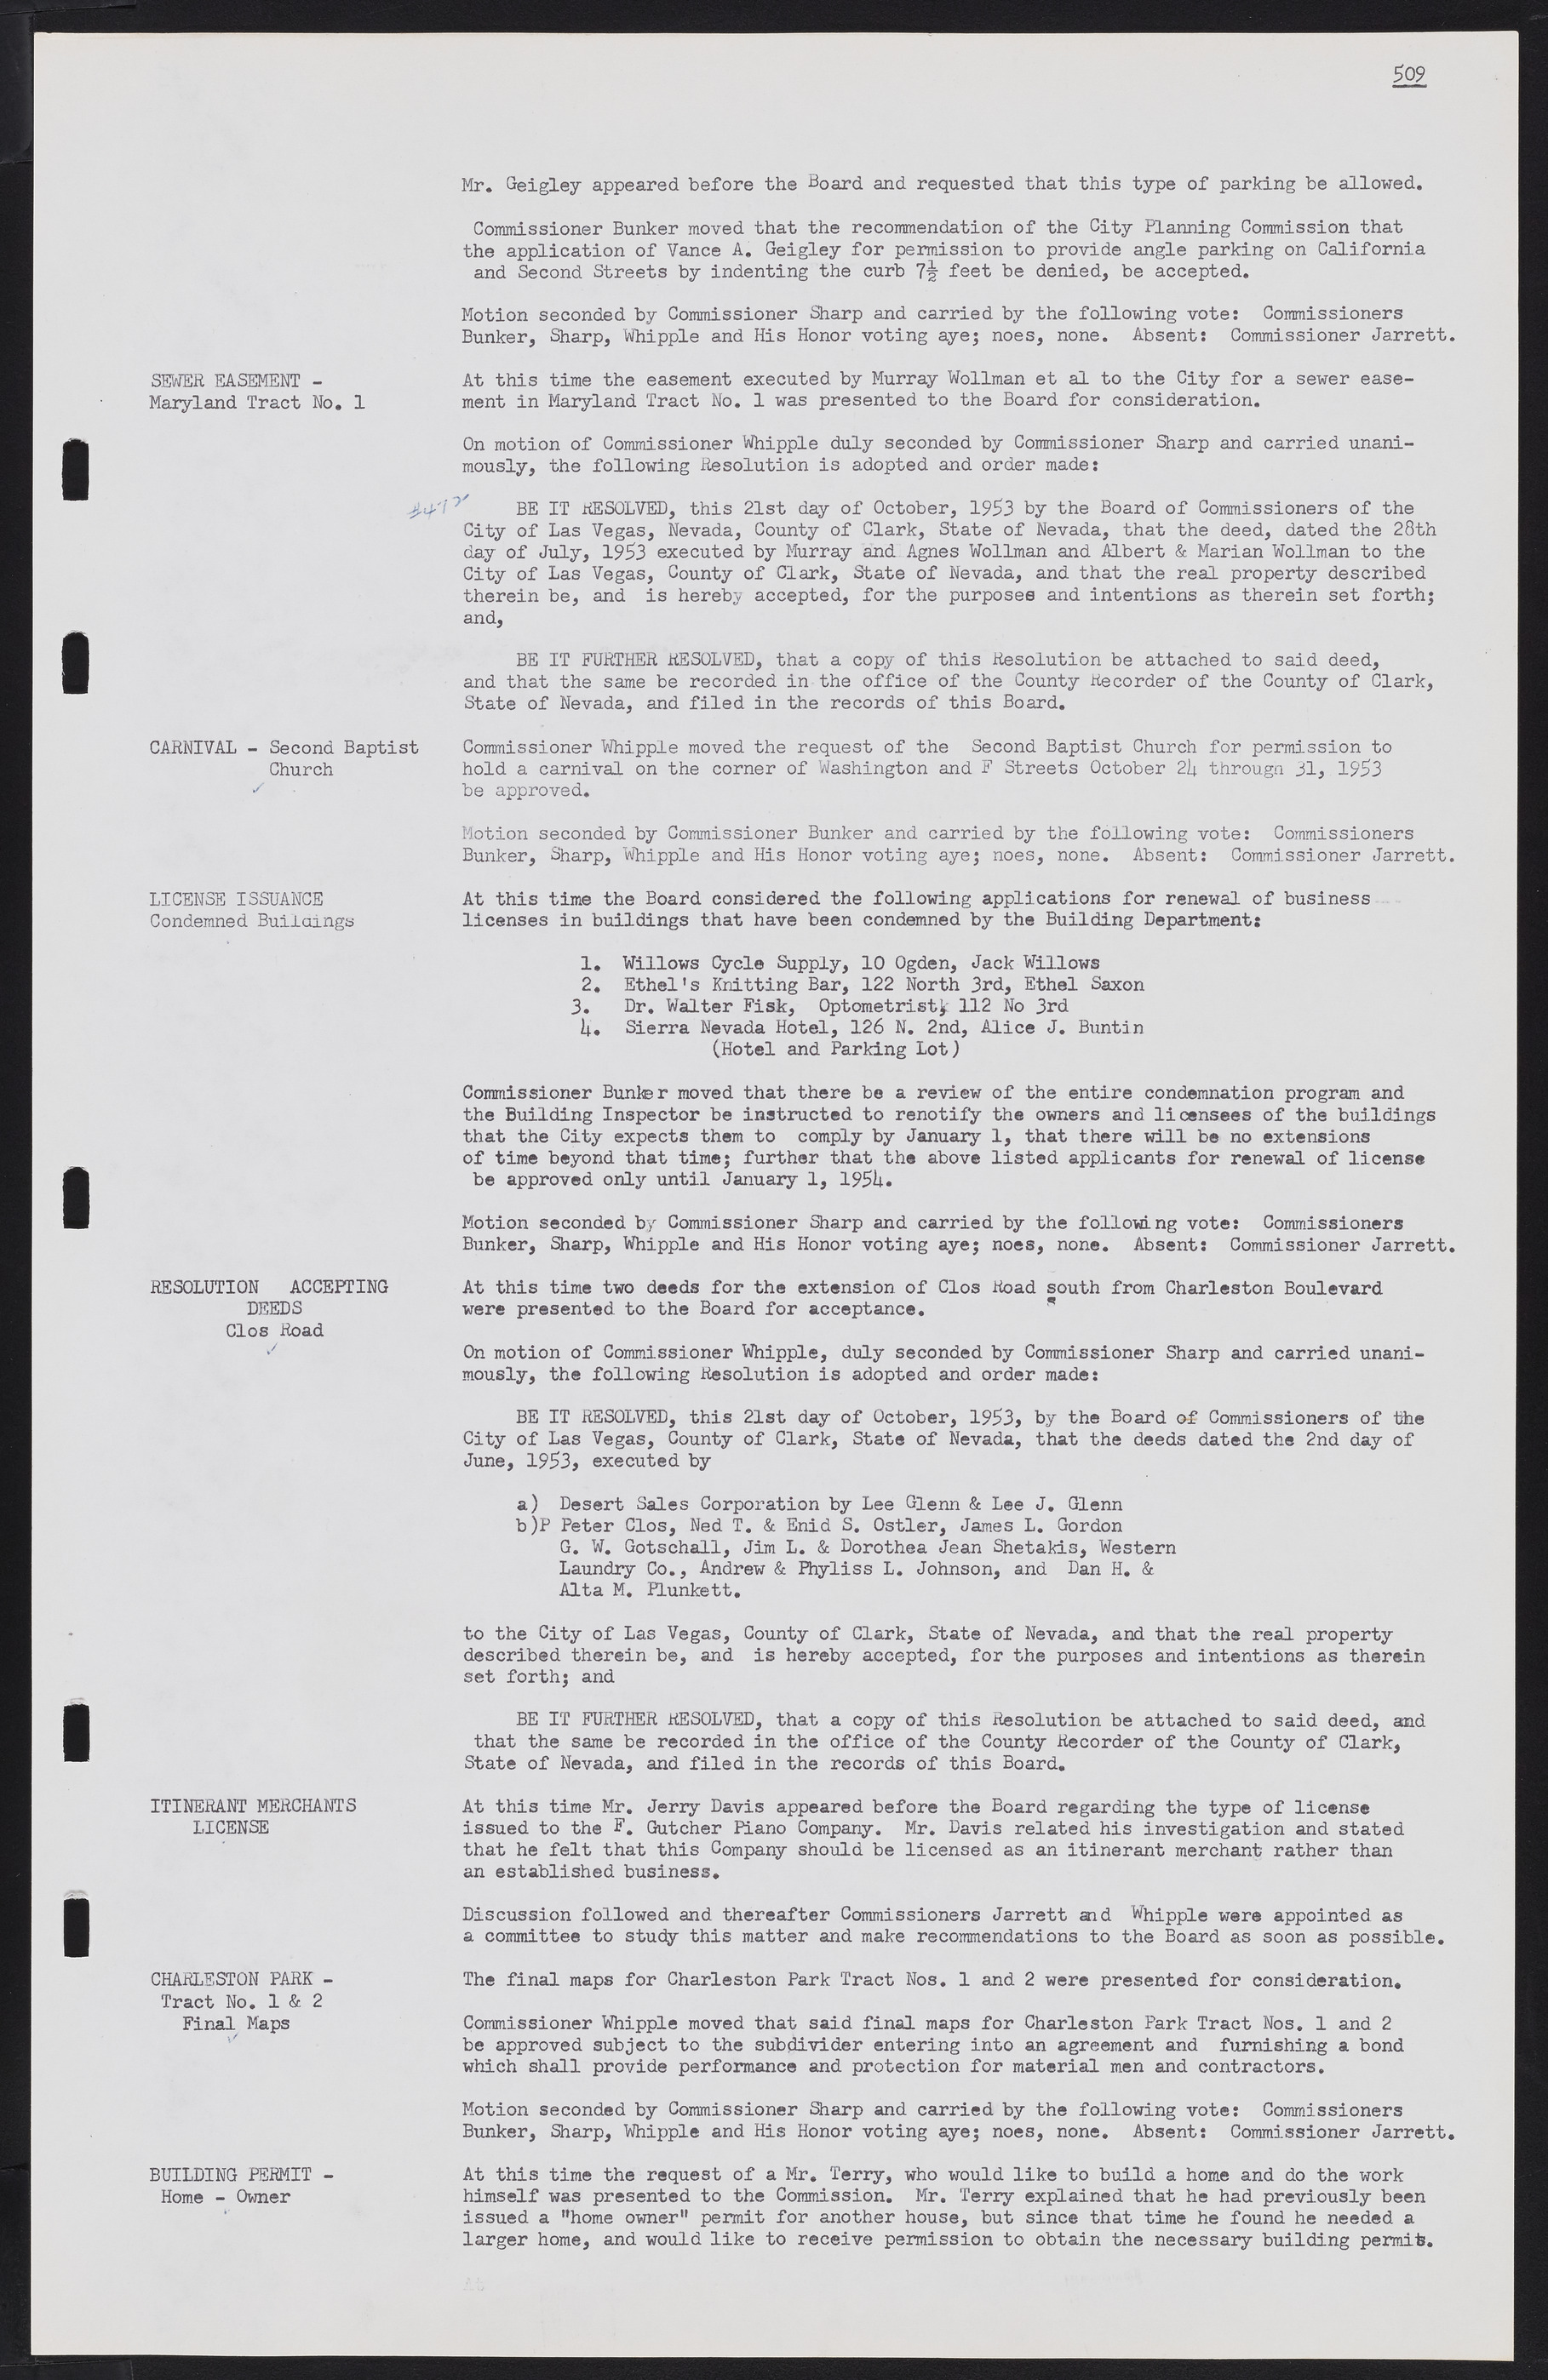 Las Vegas City Commission Minutes, May 26, 1952 to February 17, 1954, lvc000008-539